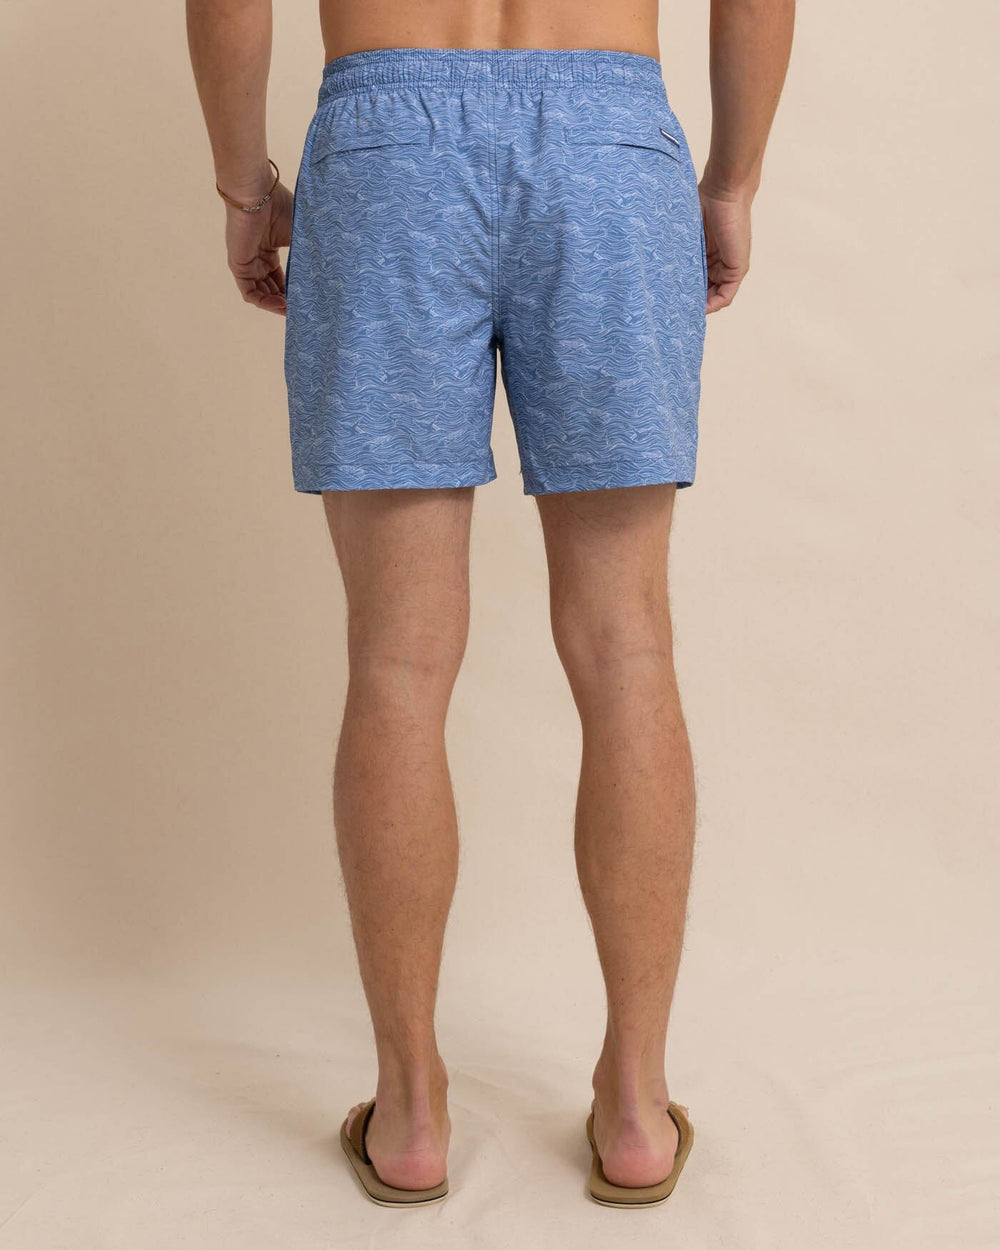 The back view of the Southern Tide The Whaler Swim Trunk by Southern Tide - Coronet Blue